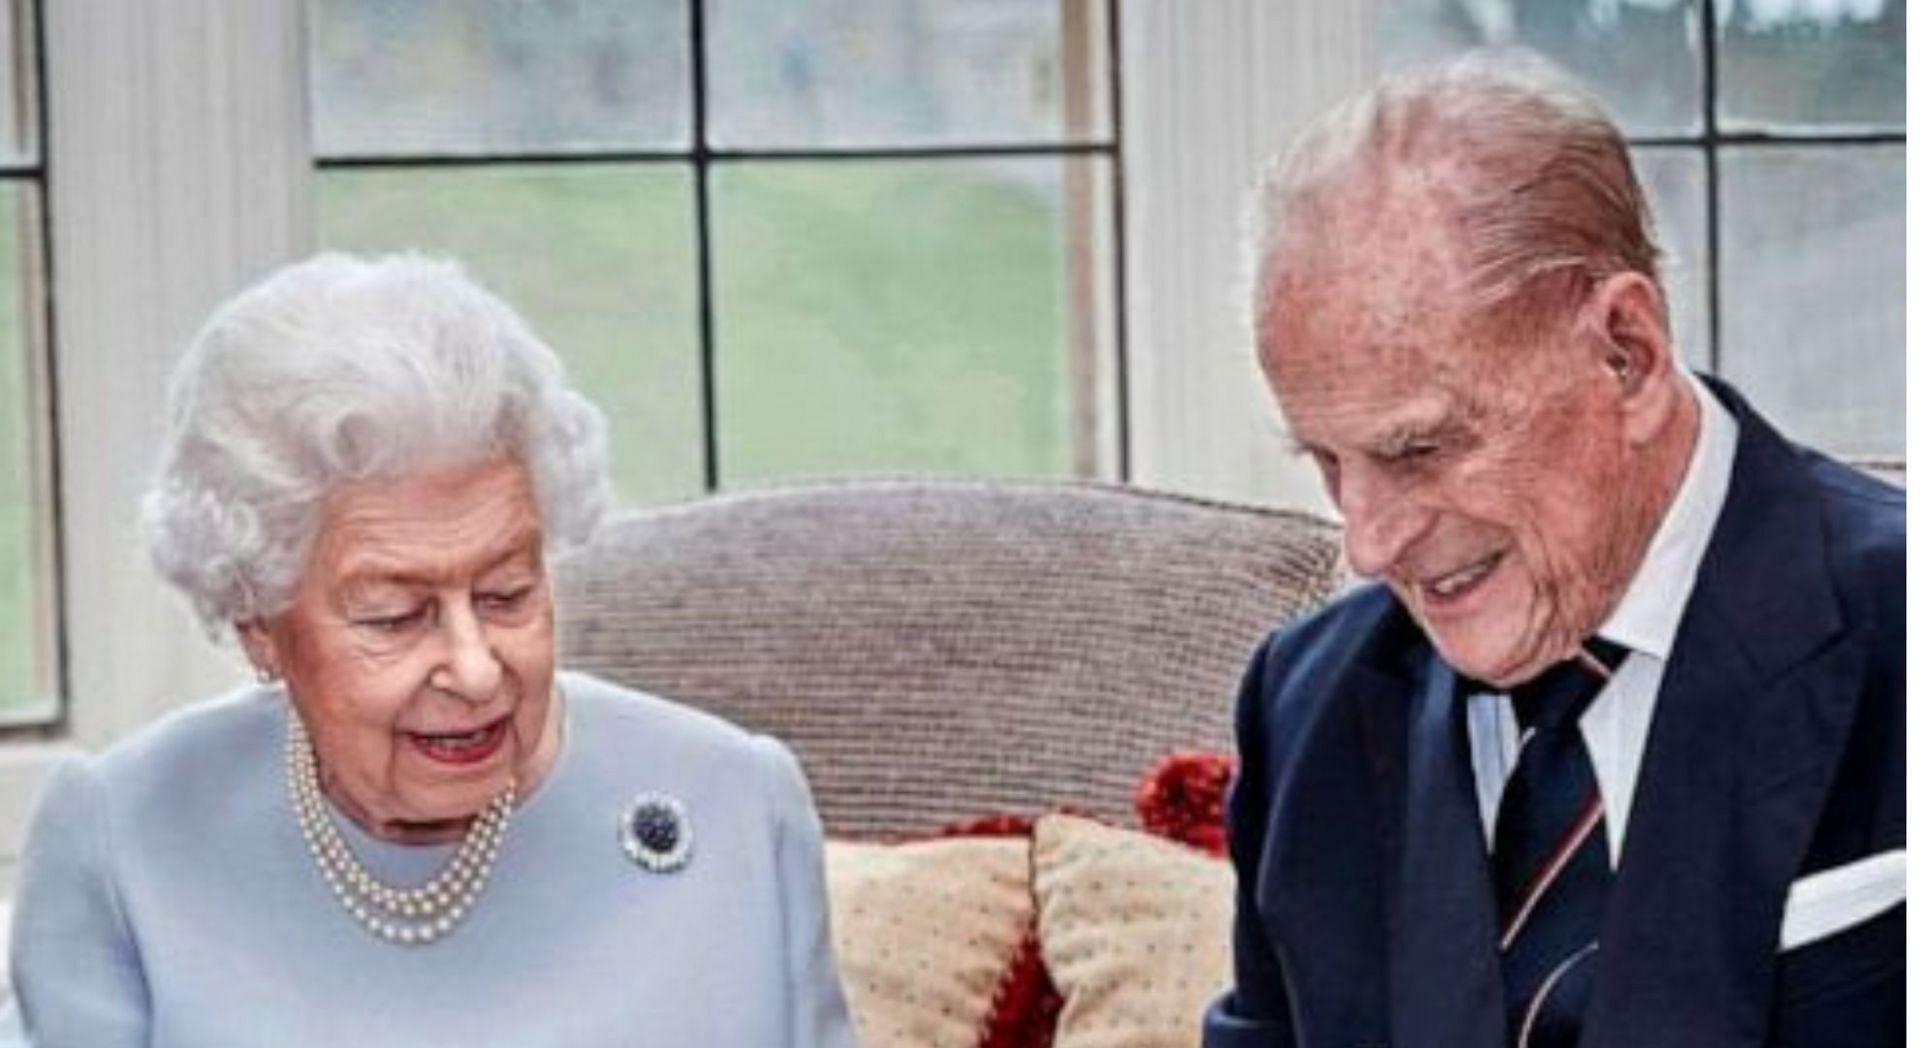 Prince Philip became the Duke of Edinburgh after his wedding to the Queen (Image via Couture and Royals/Twitter)